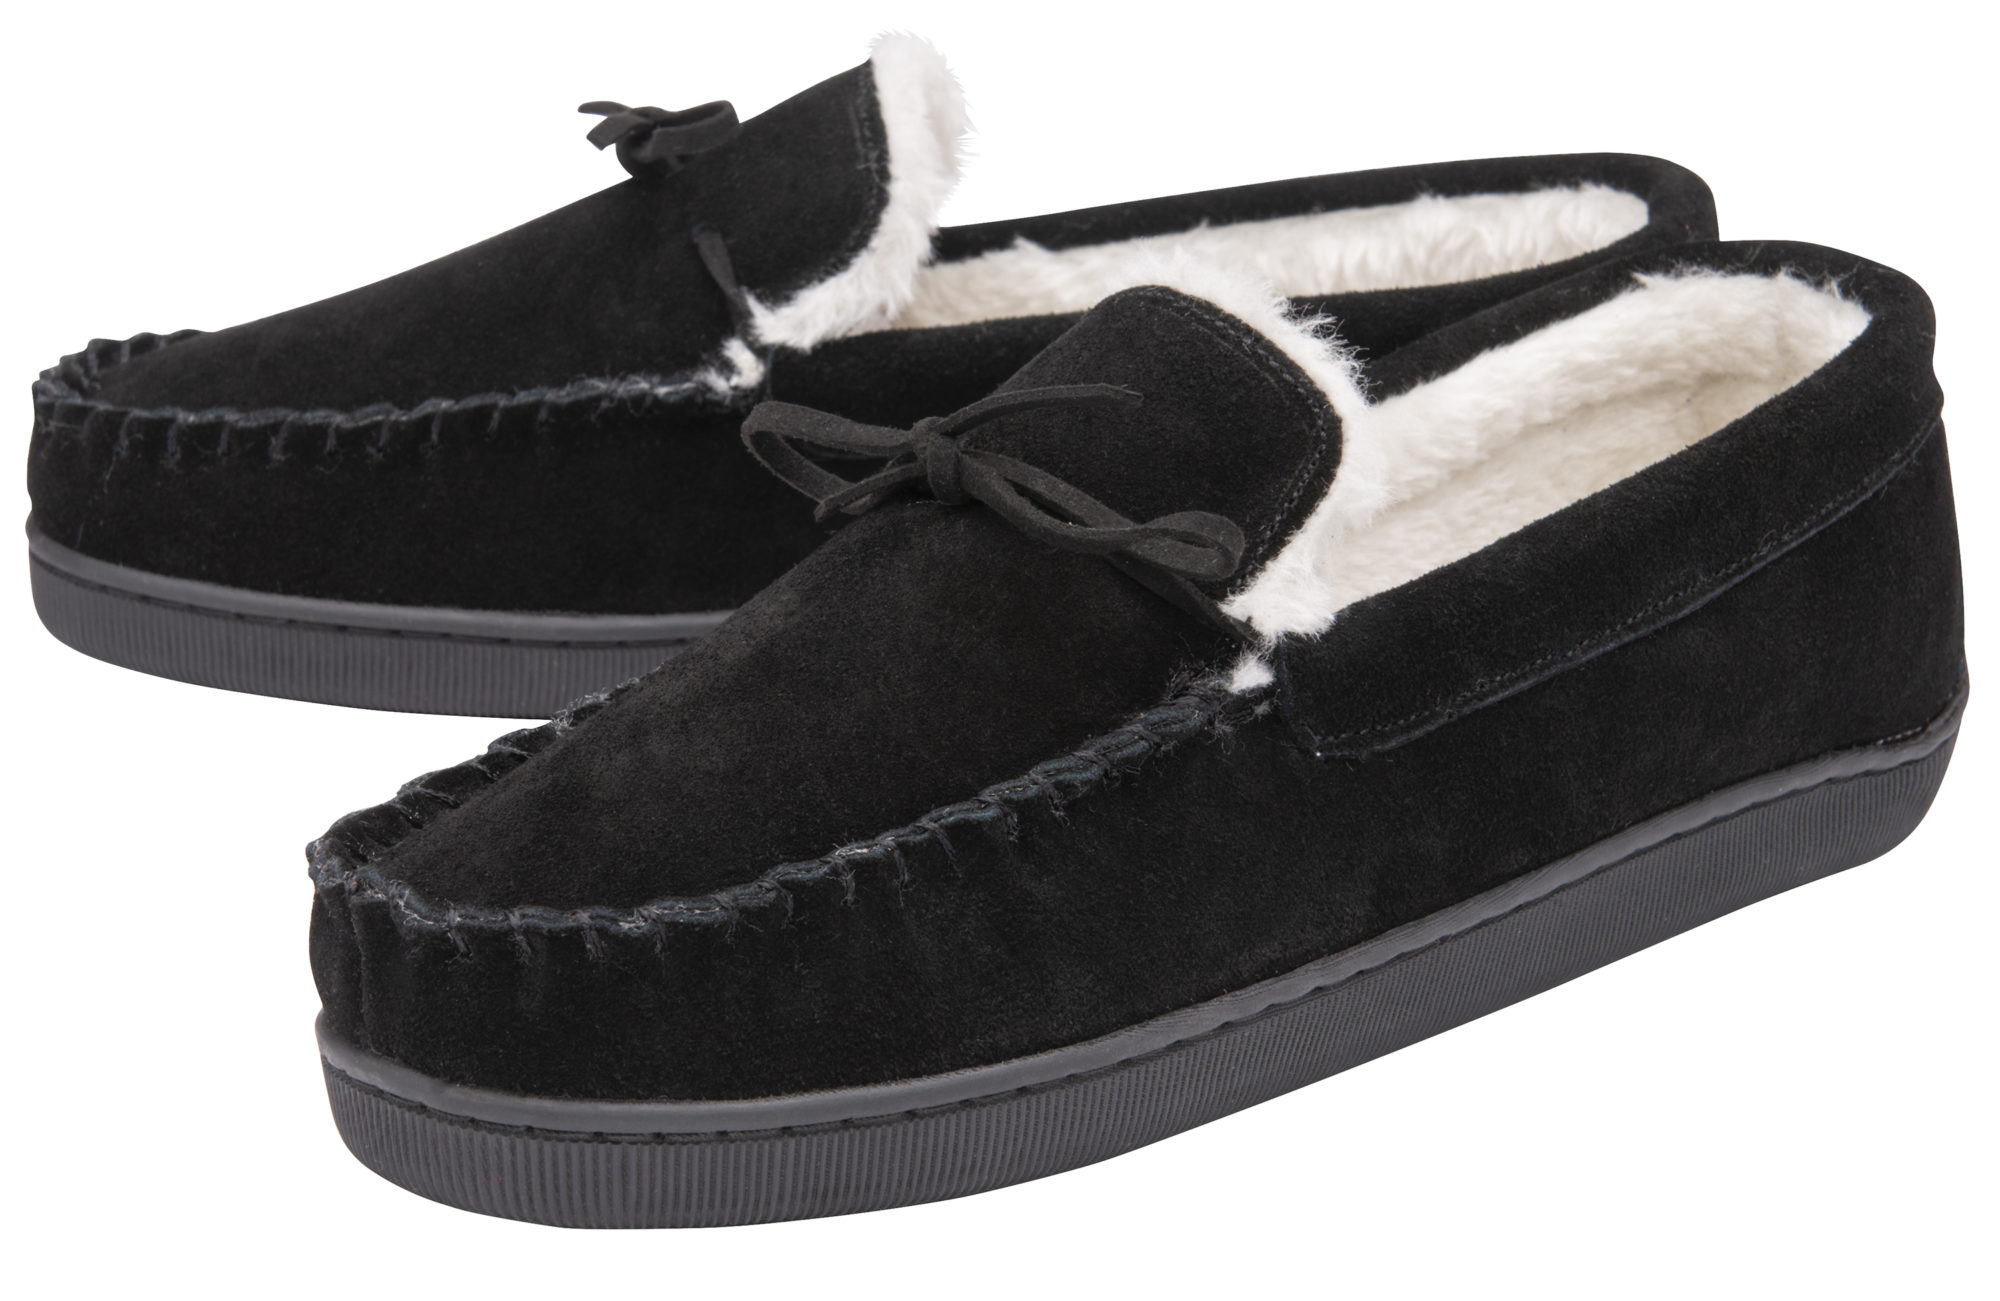 dunlop moccasin slippers